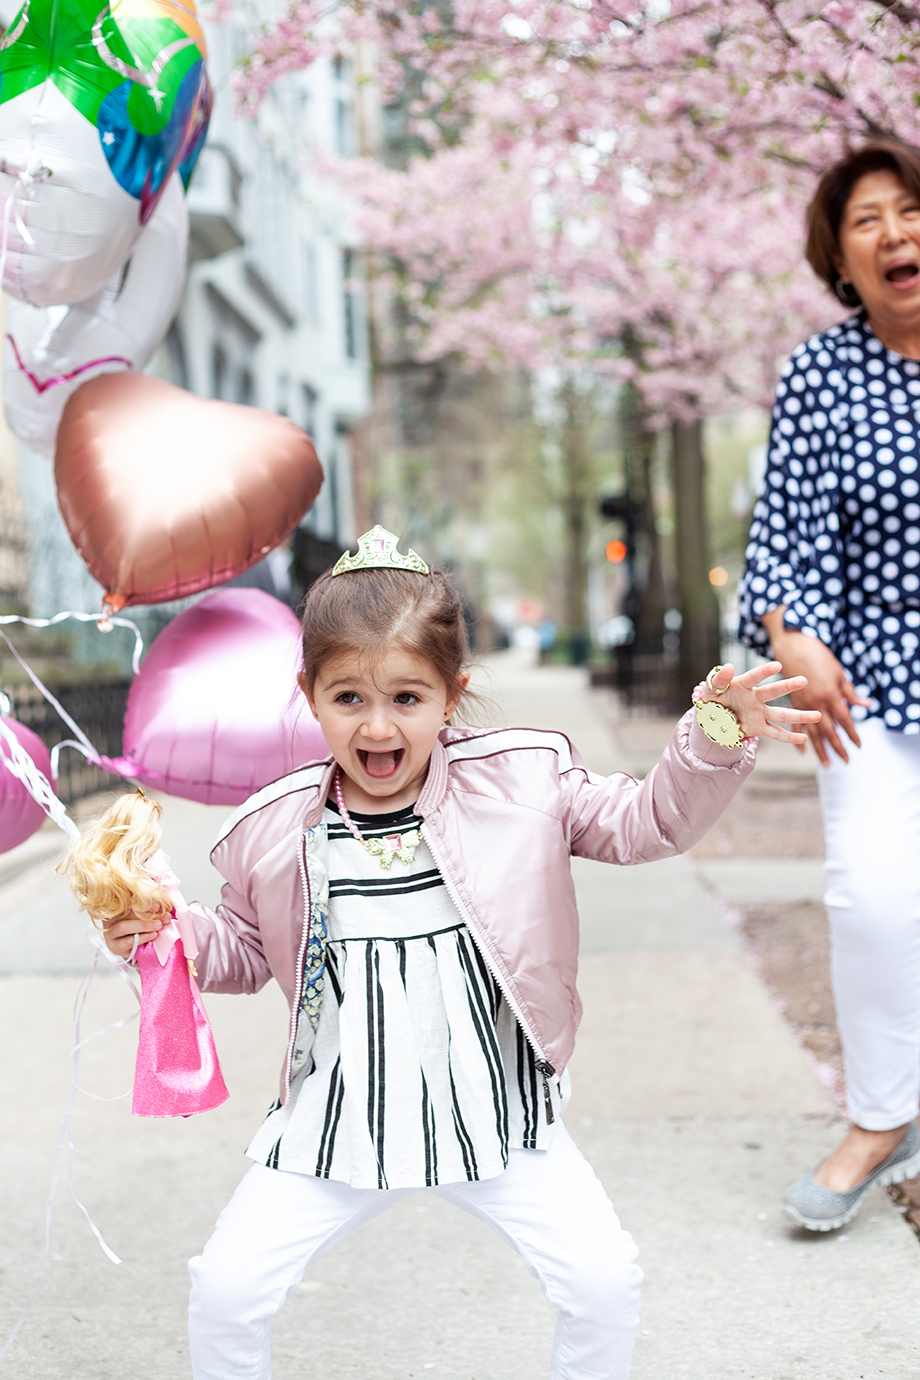 Zelda of Glitter and Bubbles wears a pink jacket and striped shirt while holding balloons. 